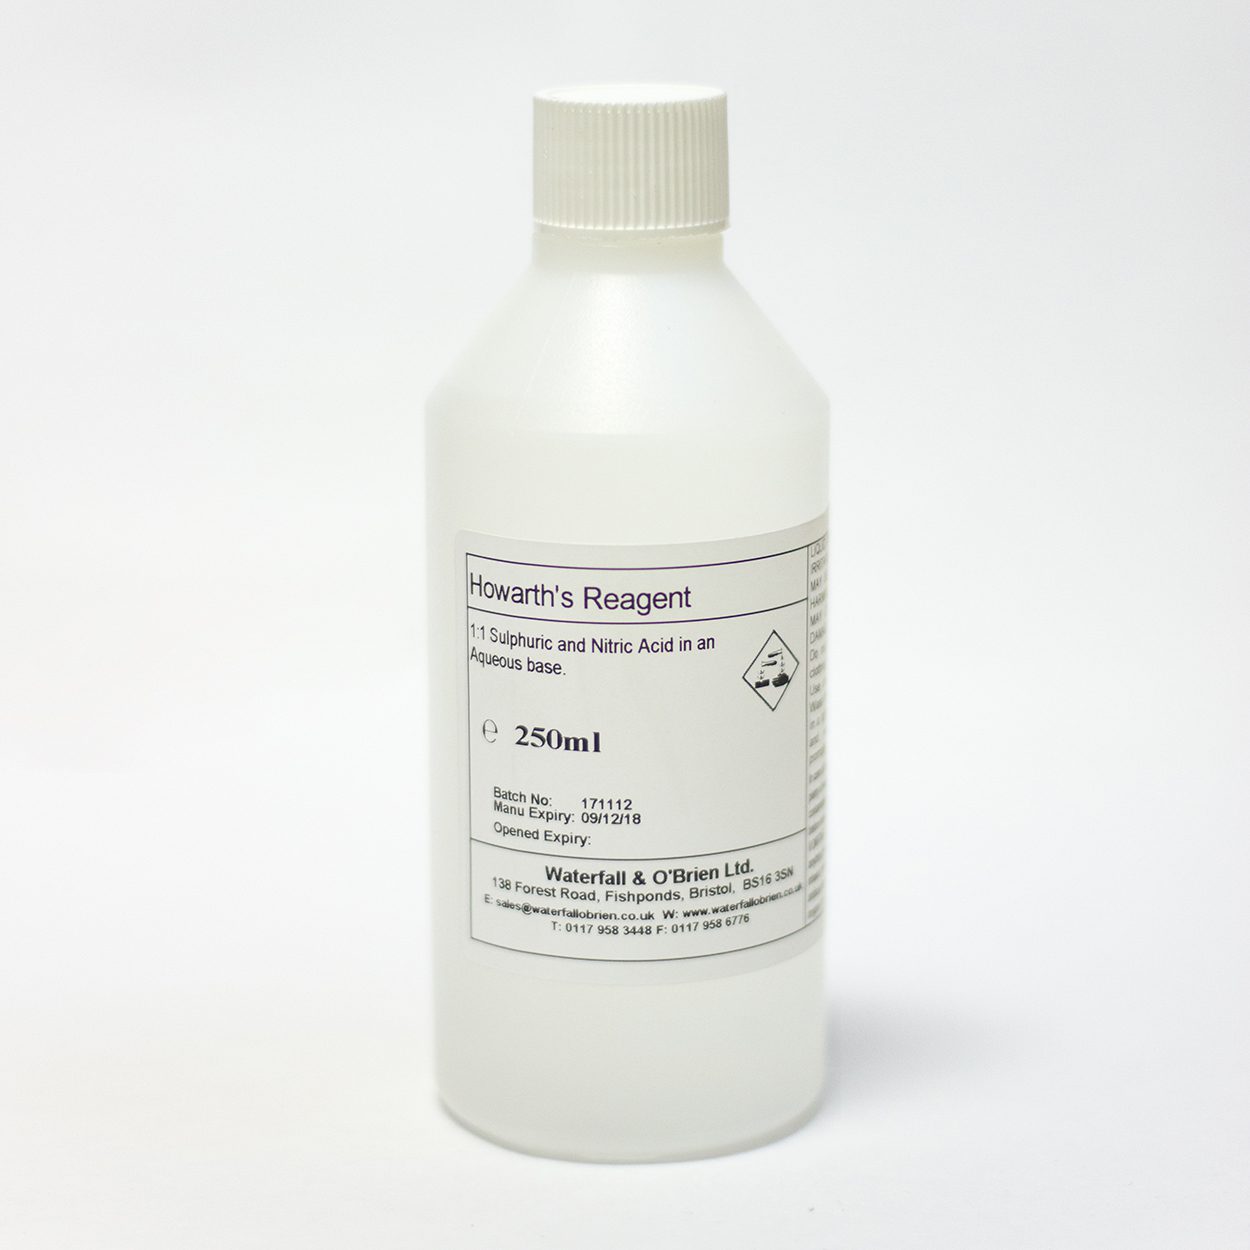 Howarth's Reagent